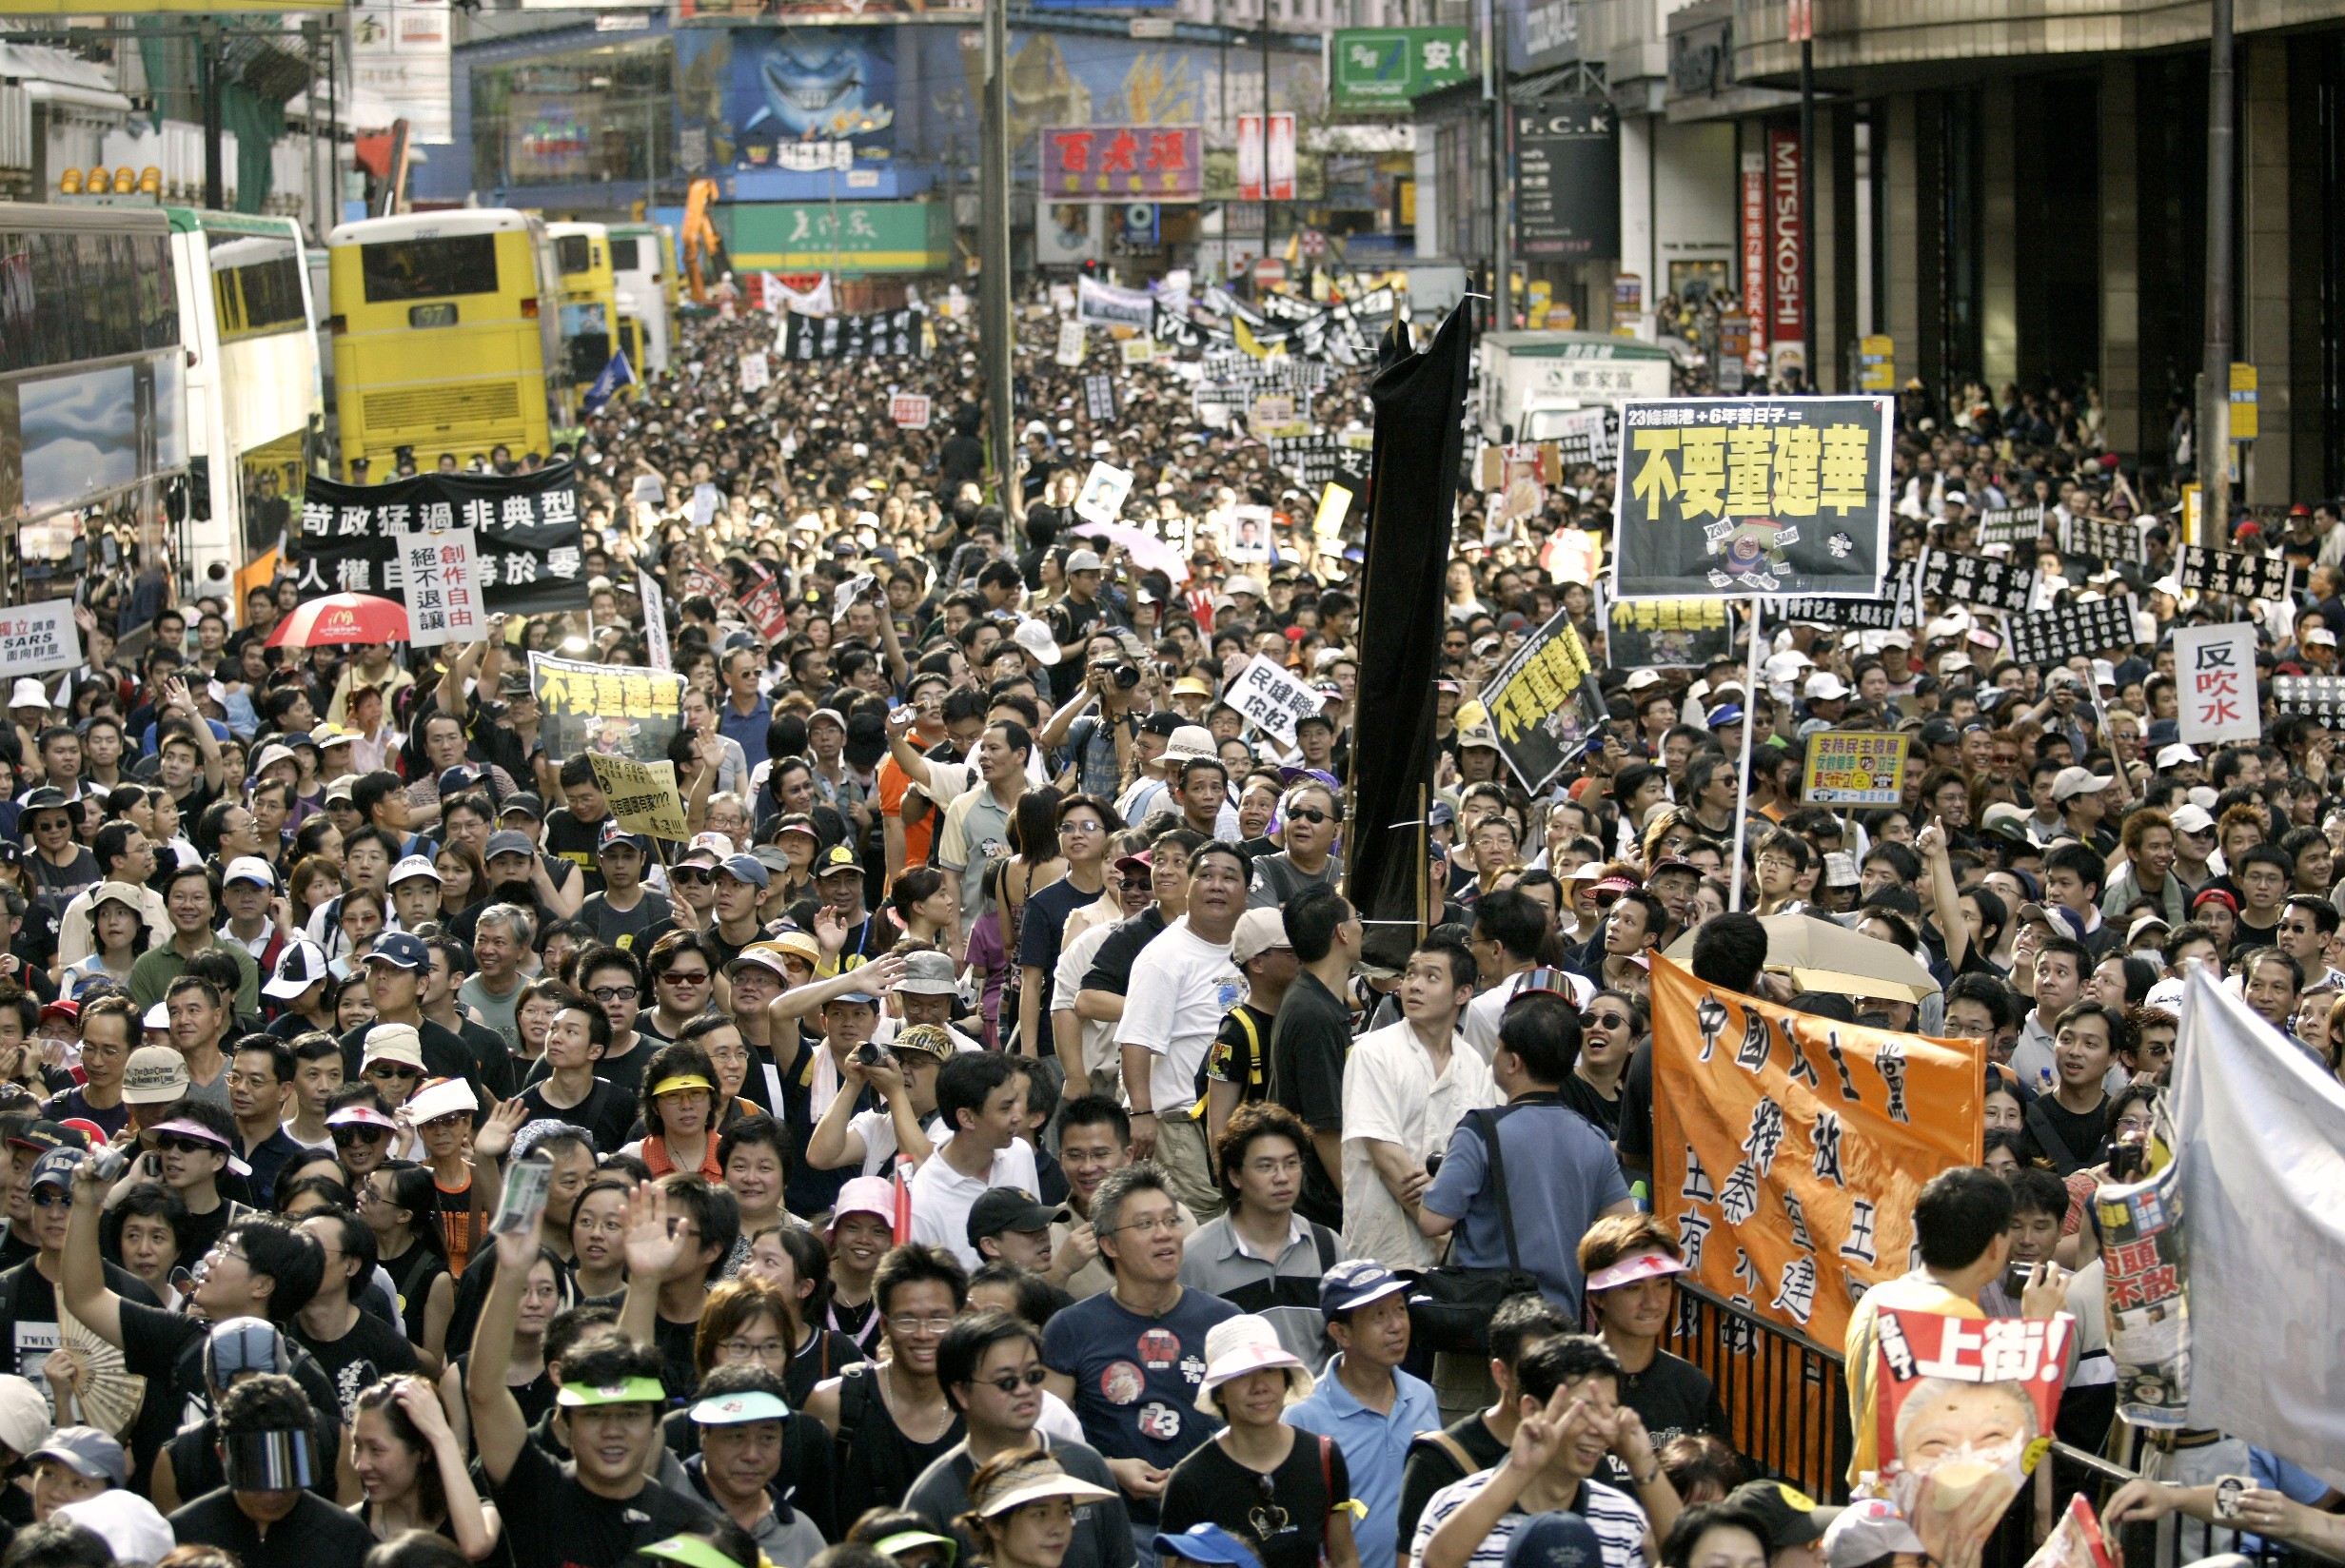 Article 23 of the Basic Law was shelved following massive demonstrations against the Hong Kong government in 2003. Photo: Dickson Lee